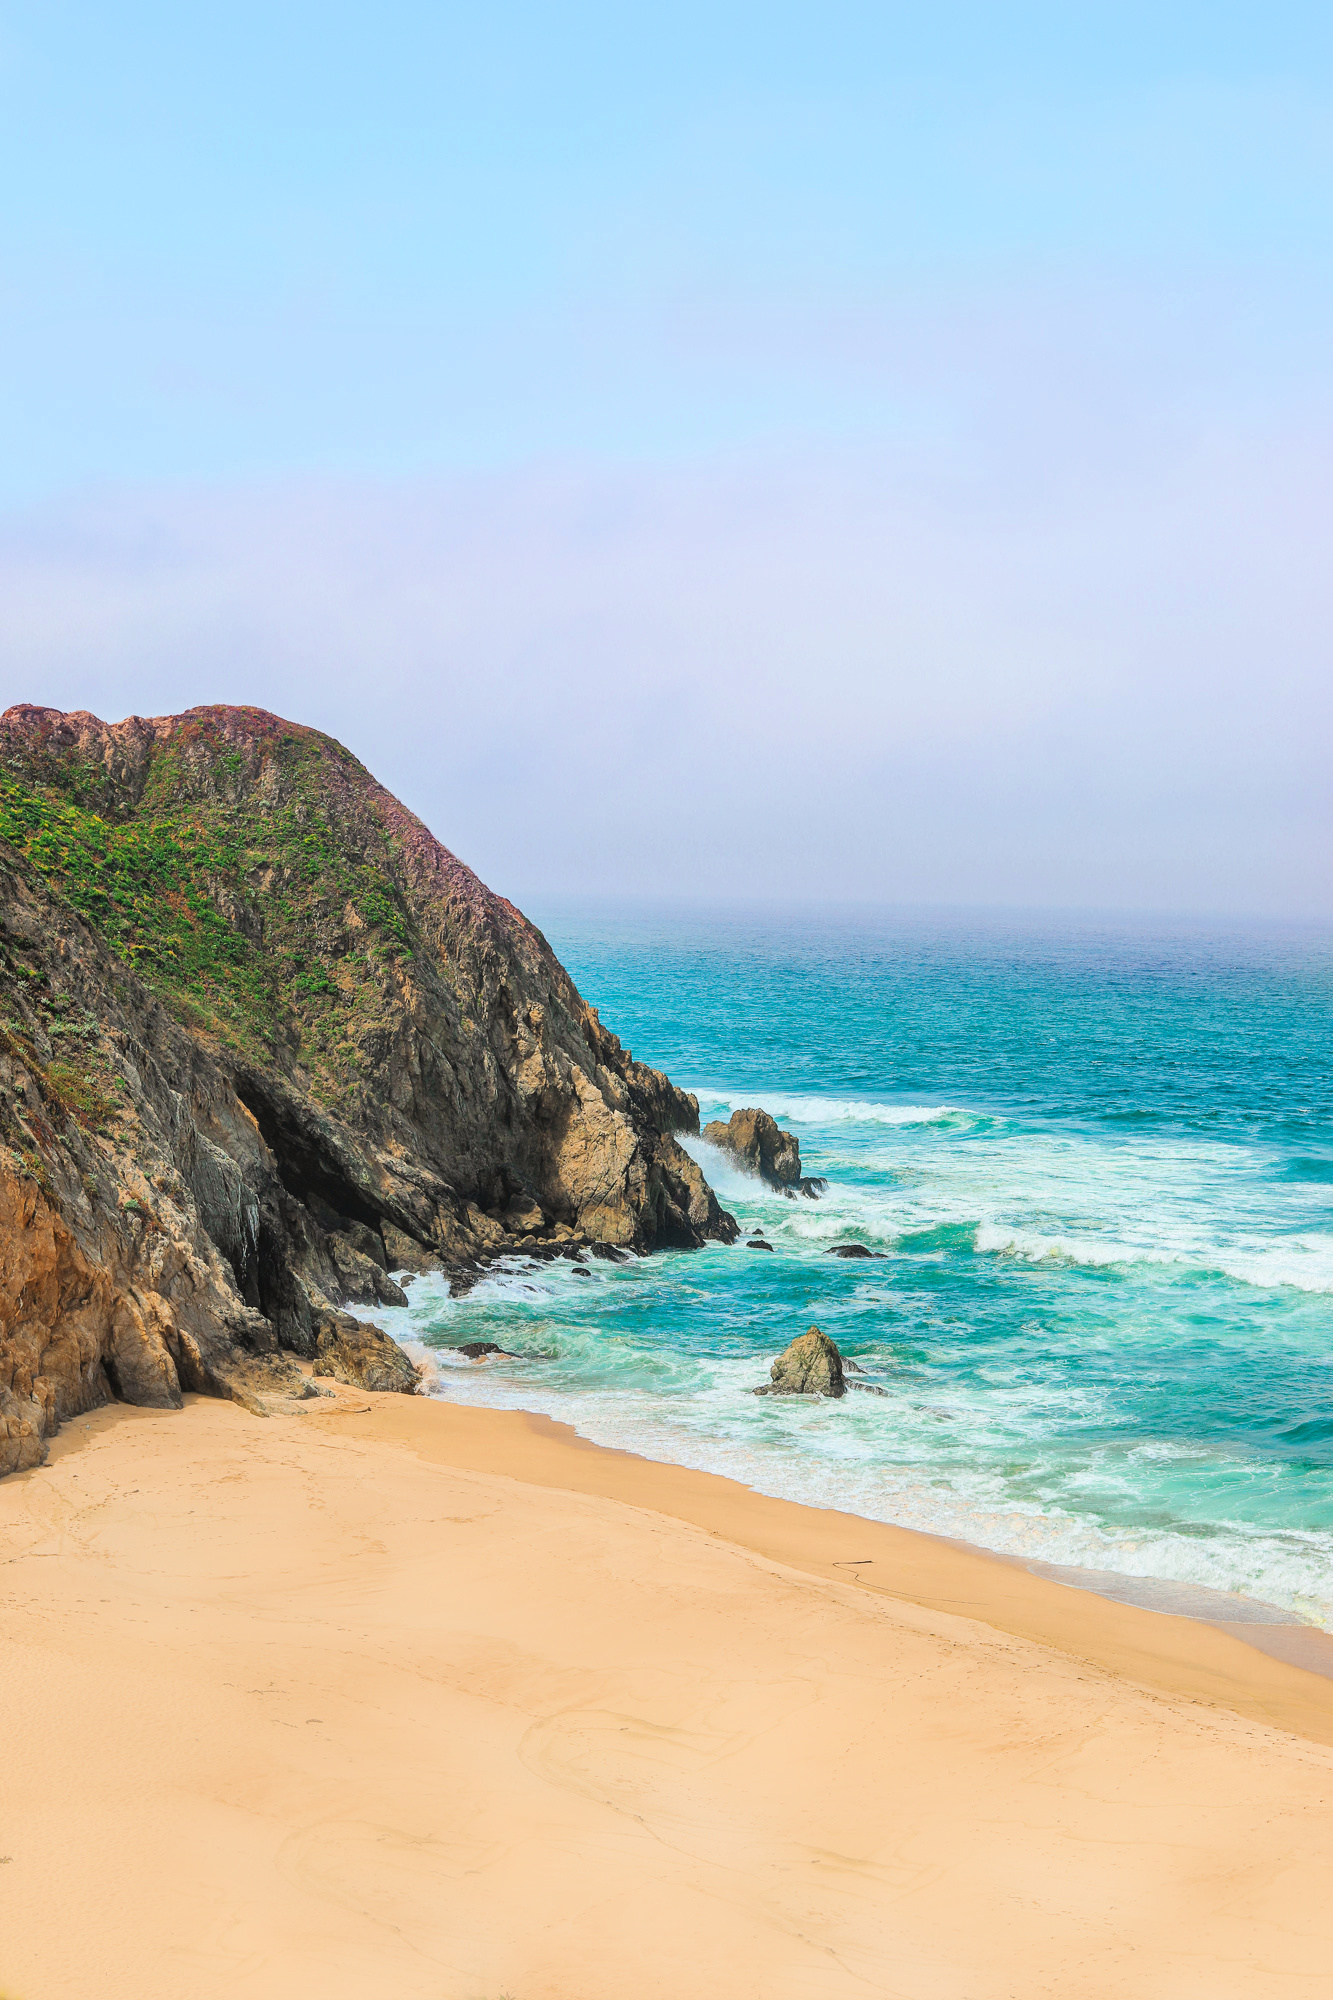 pacific coast highway, summer travel, road trip, itinerary , California coast, grey whale cove, the coast of California road trip guide, travel, summer, san fransico, fun, summer trip, blogging, highway one, traveling the coast of cali, ocean, pacific, mountains, photography,